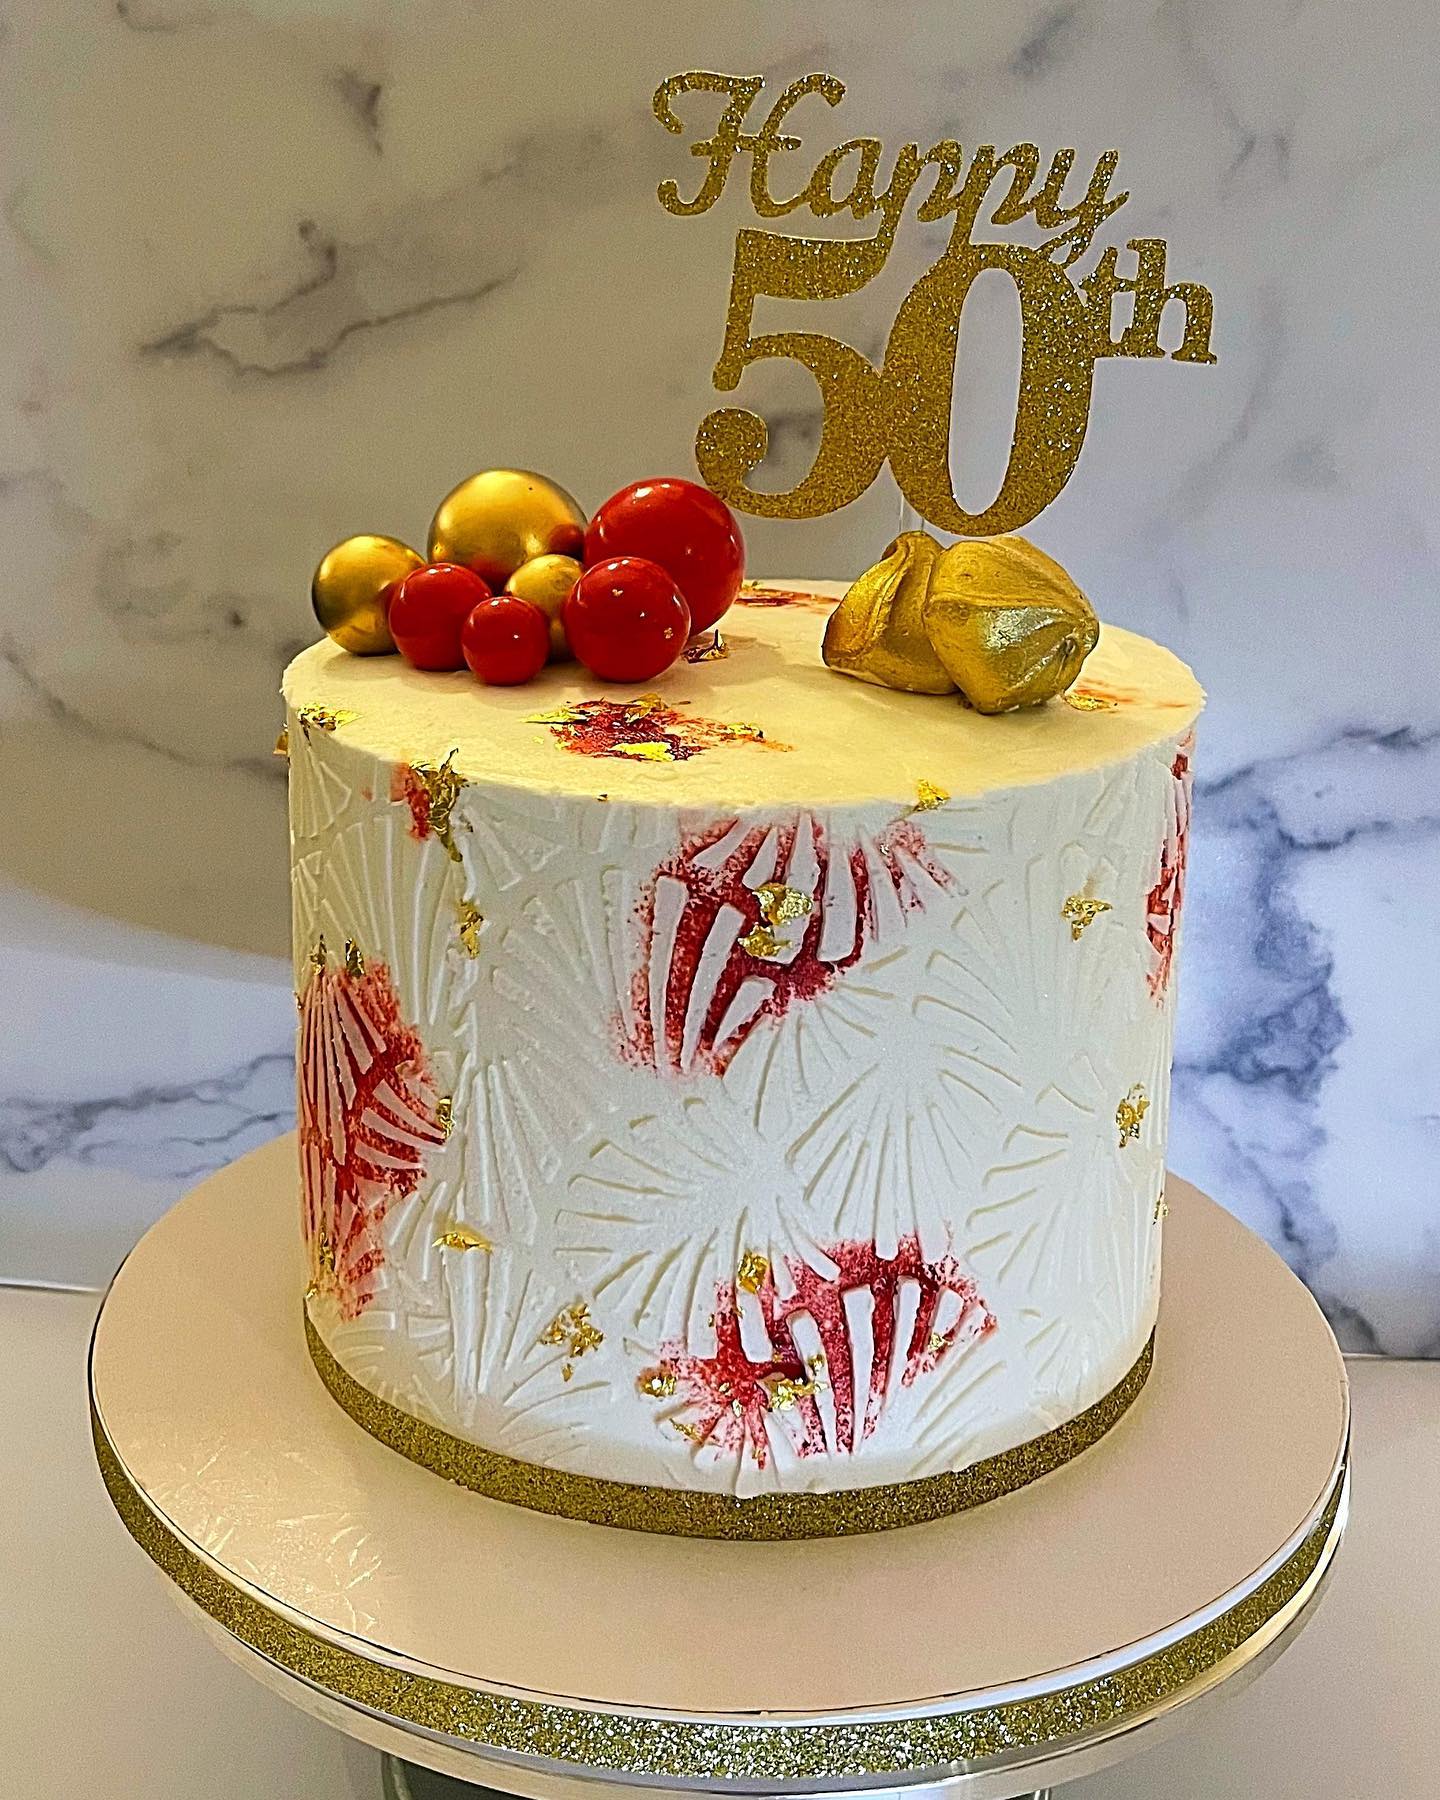 476 50th Birthday Cake Images, Stock Photos, 3D objects, & Vectors |  Shutterstock